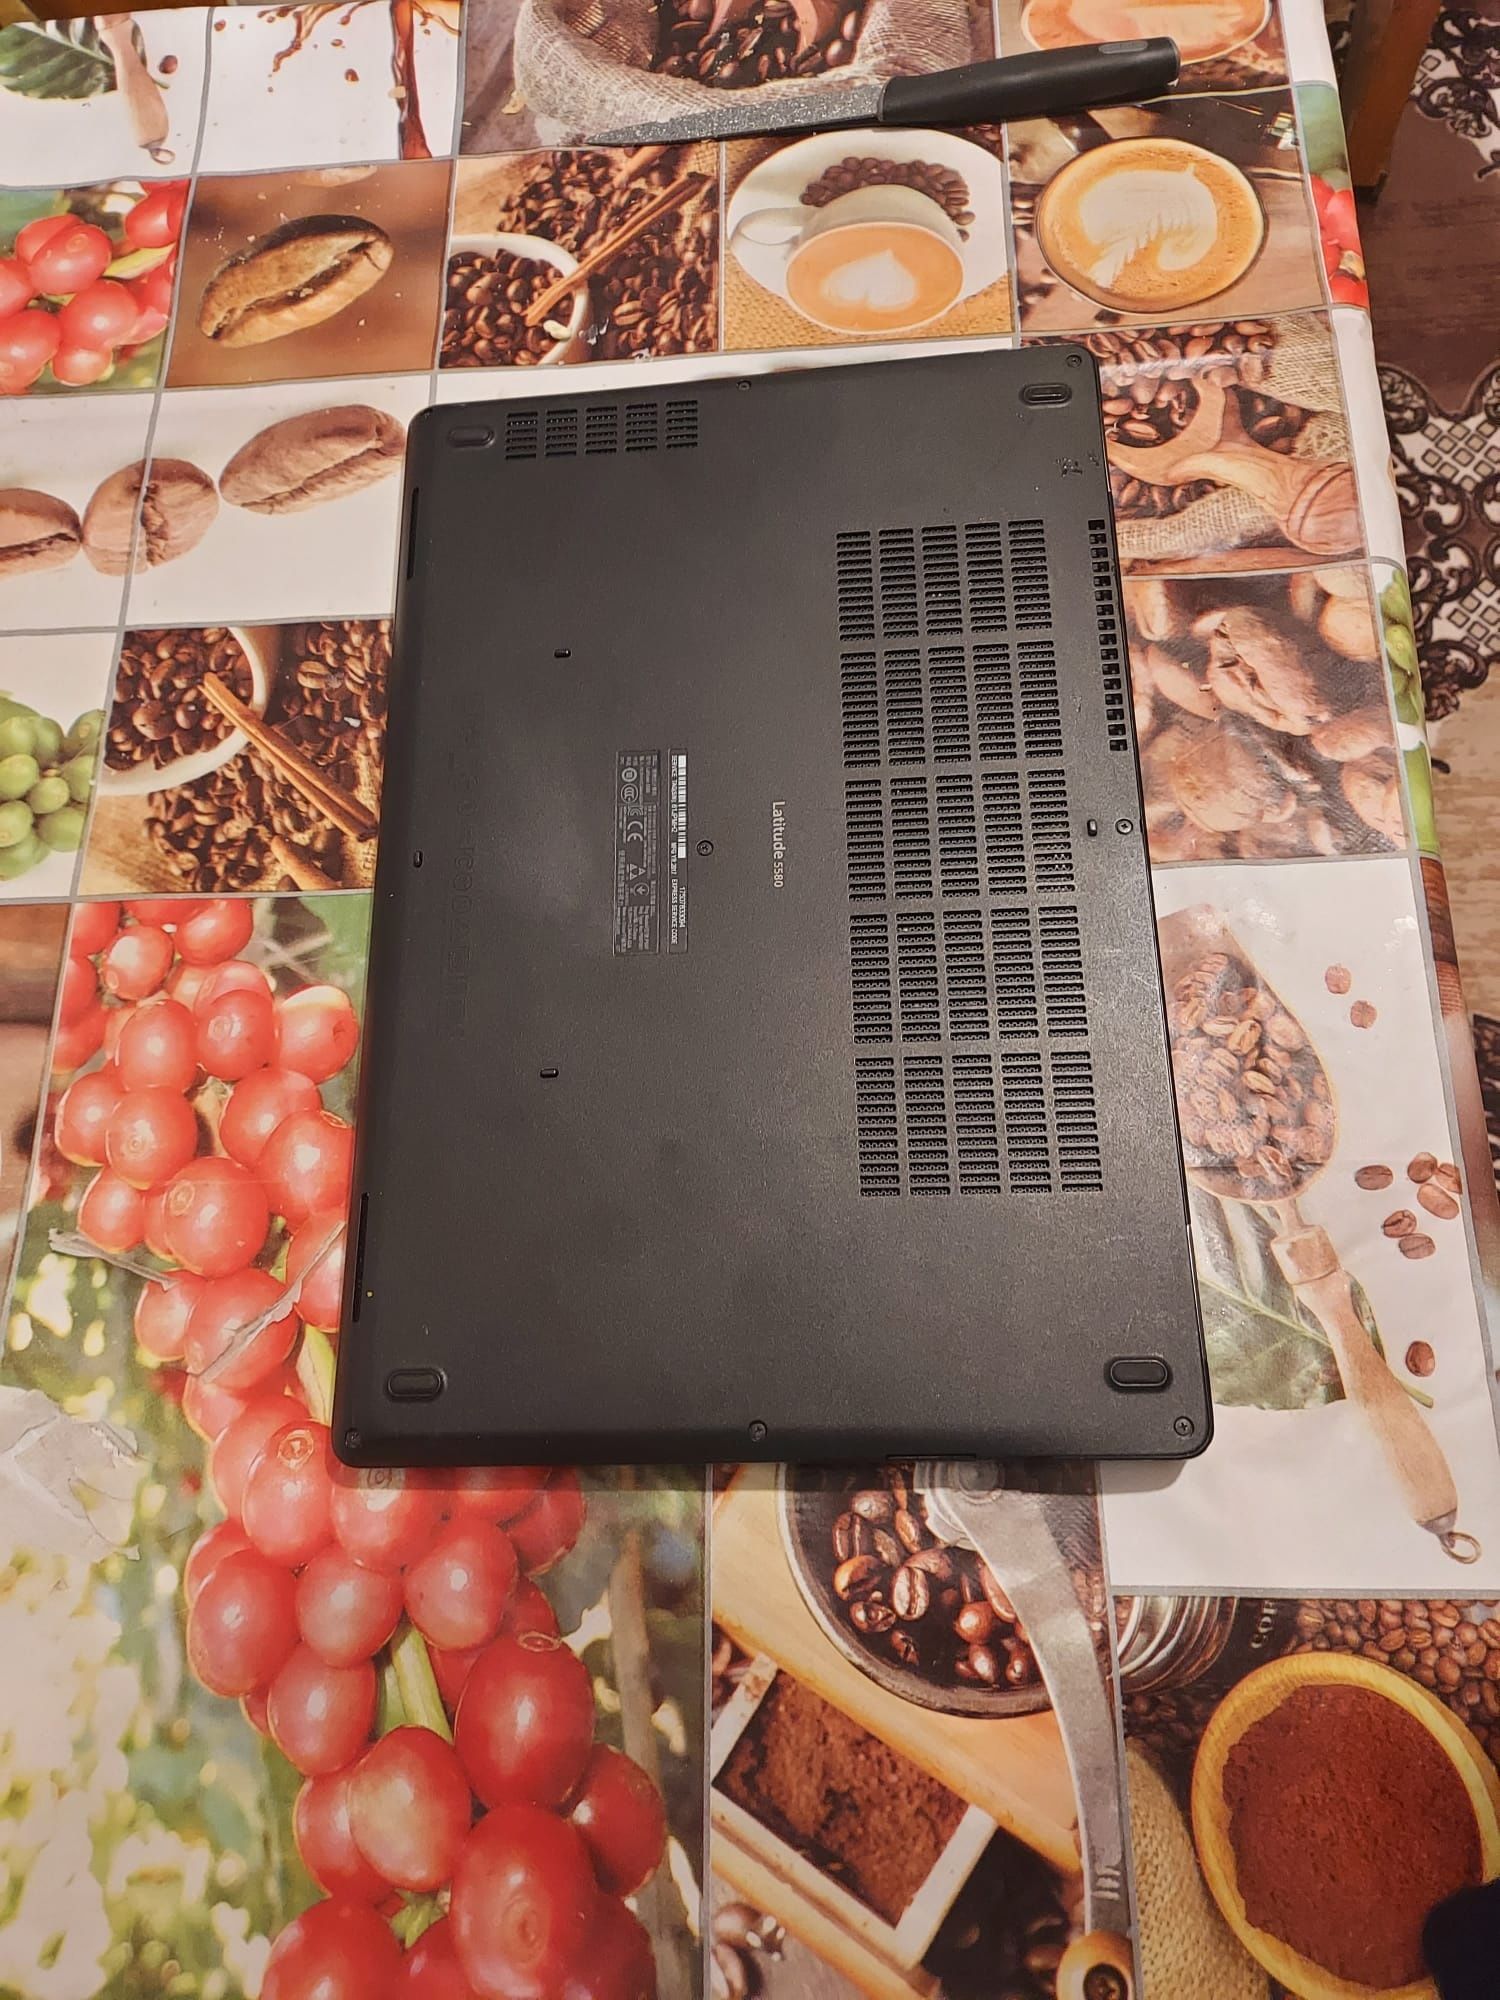 Laptop Dell Latitude 5580 Touch Screen i5, 16gb ram, hard 128gb second